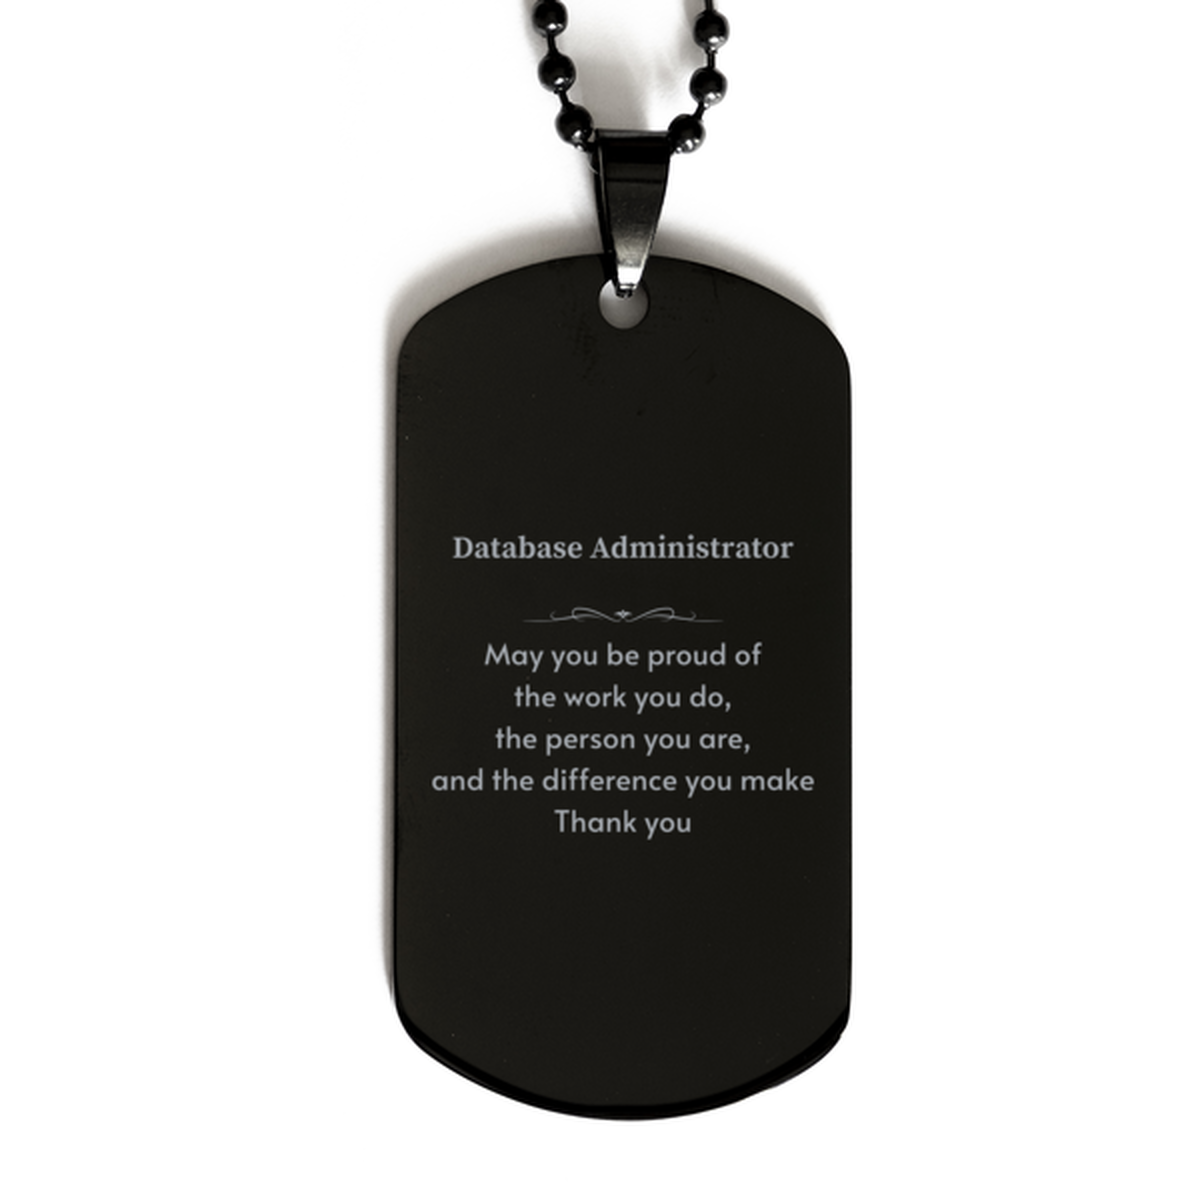 Heartwarming Black Dog Tag Retirement Coworkers Gifts for Database Administrator, Database Administrator May You be proud of the work you do, the person you are Gifts for Boss Men Women Friends